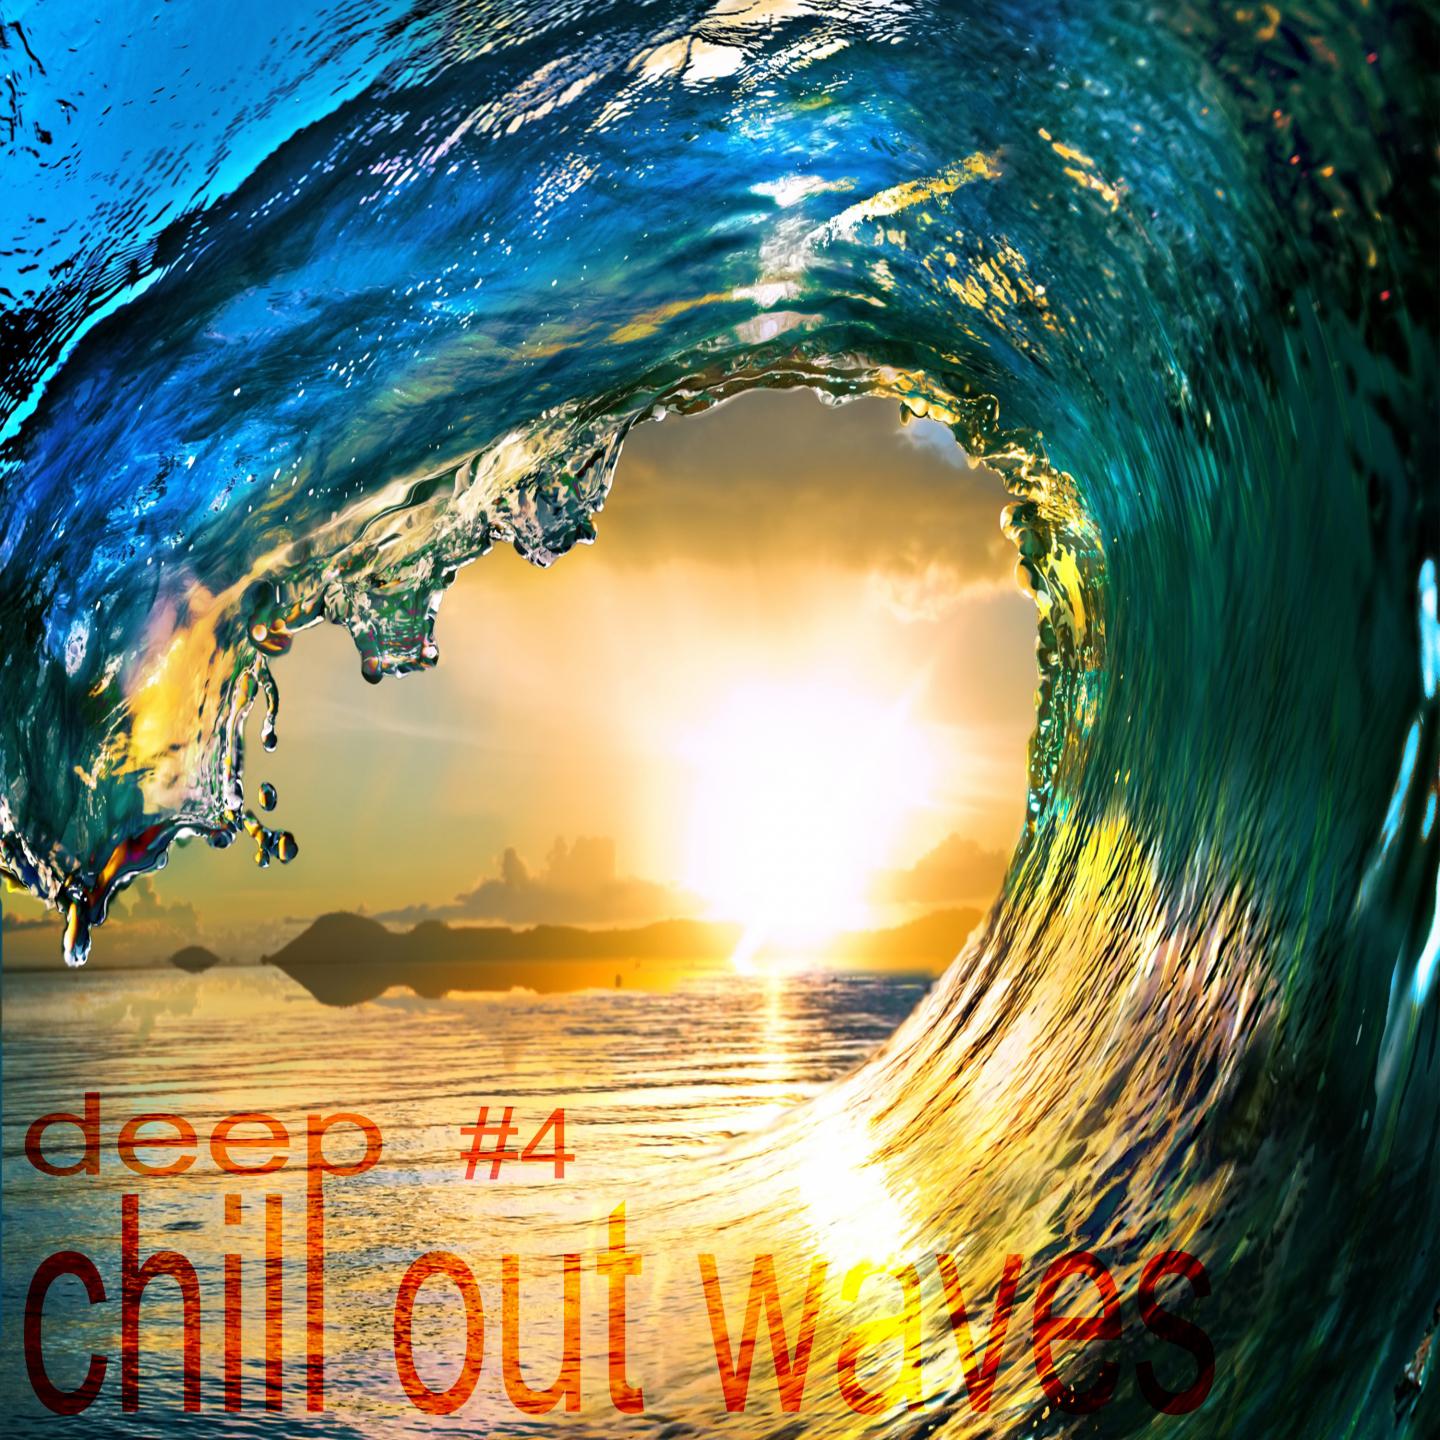 deep chill out waves vol.4